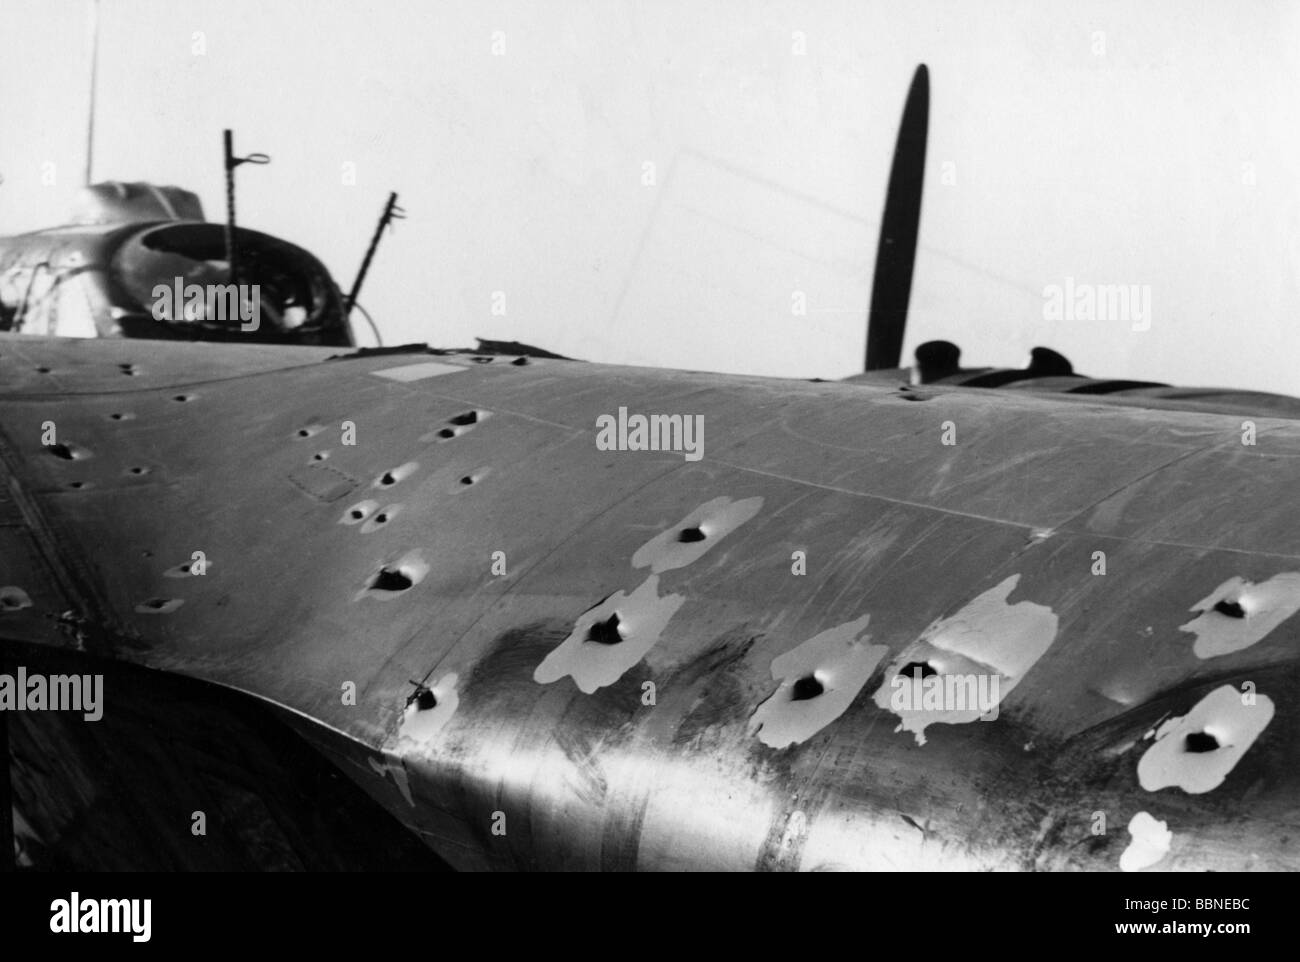 events, Second World War / WWII, aerial warfare, aircraft, crashed / damaged,  German bomber Dornier Do 17 back from a mission against England, hit by a  British fighter and AA fire, Lille,